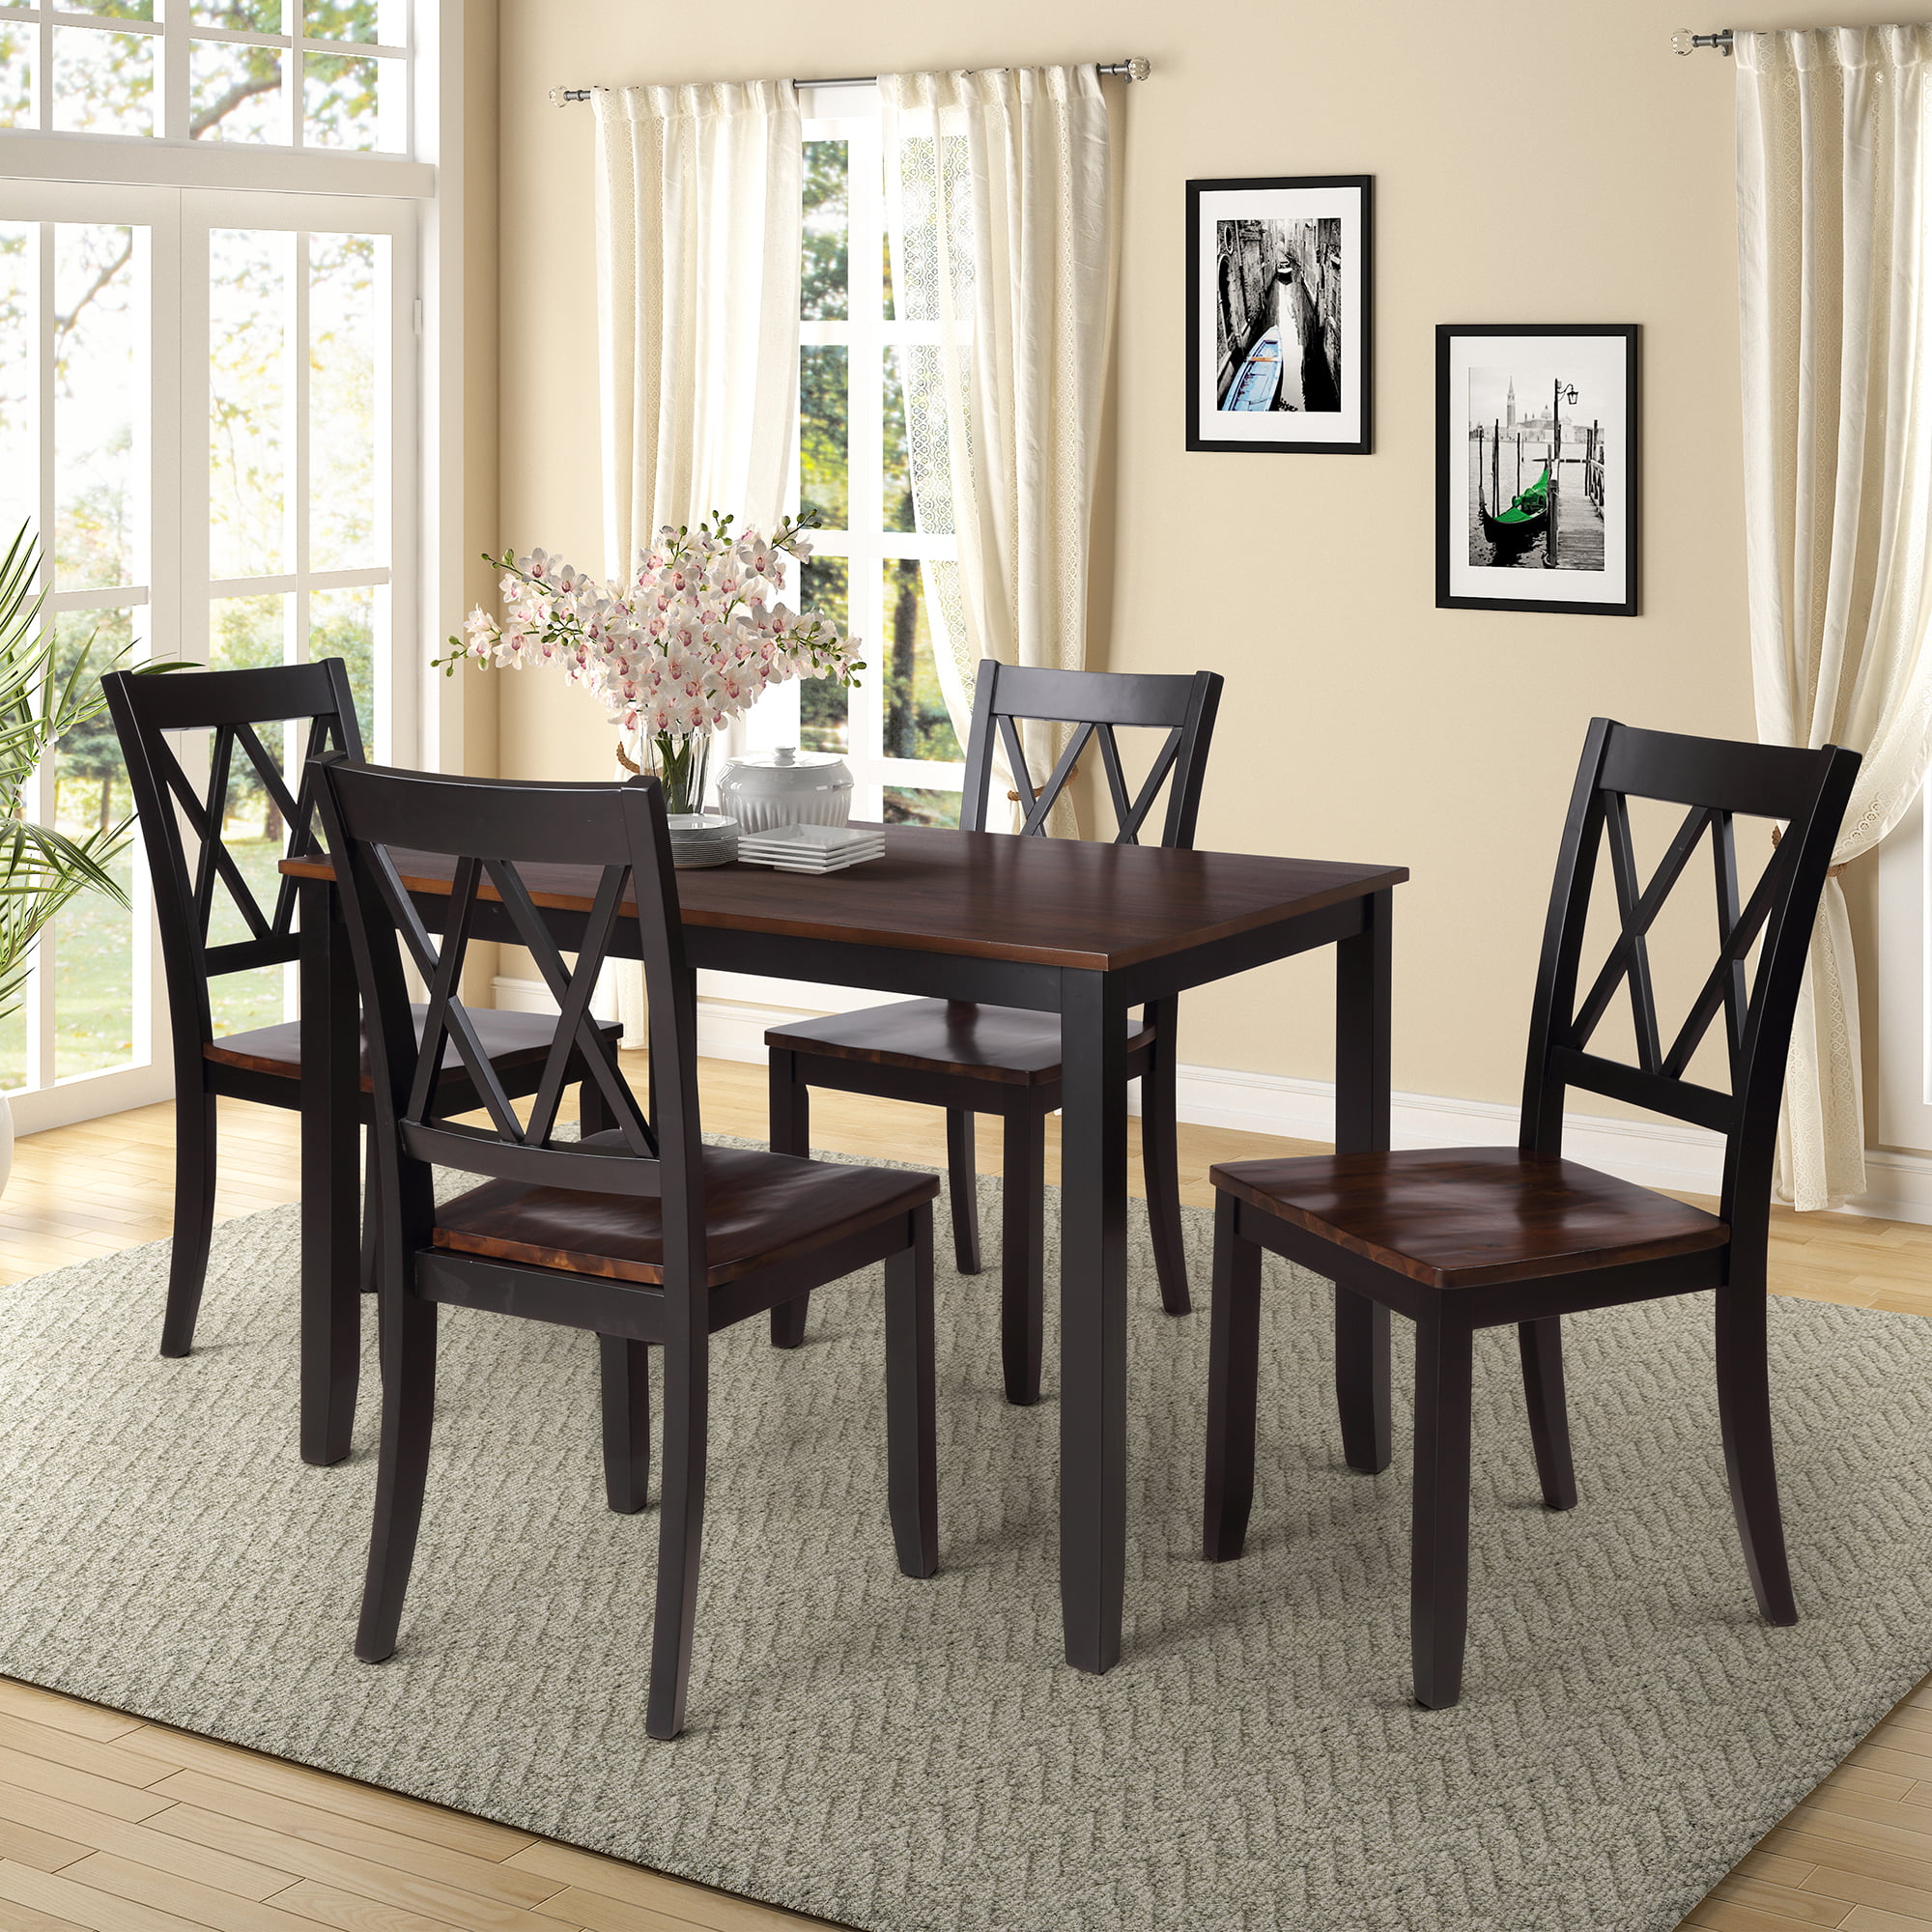 Urhomepro 5 Piece Wood Dining Set, Contemporary Dining Room Sets For Small Spaces